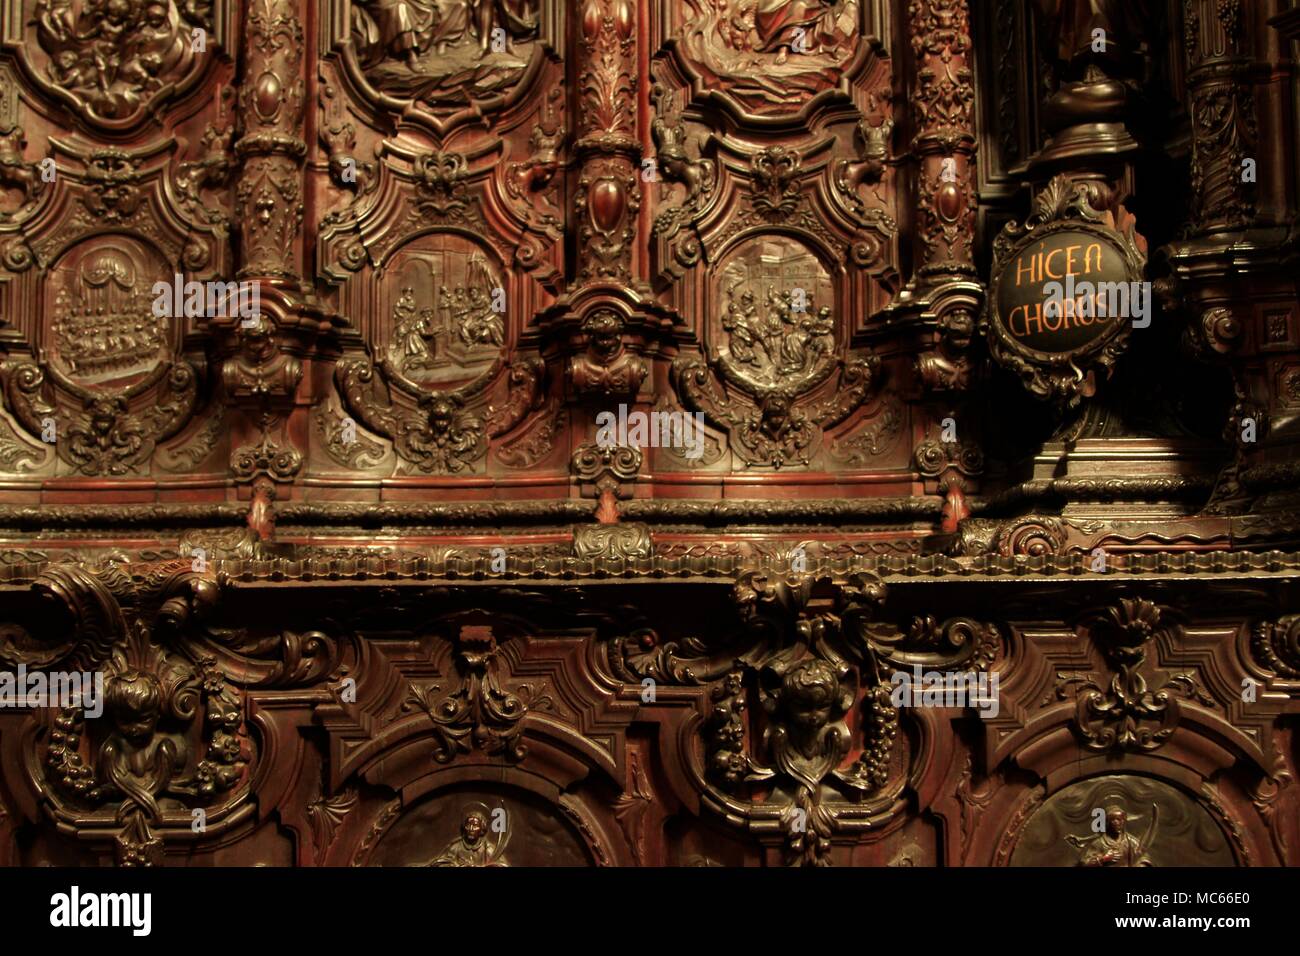 Choir Stall detail, Mosque-Cathedral of Cordoba, Spain Stock Photo